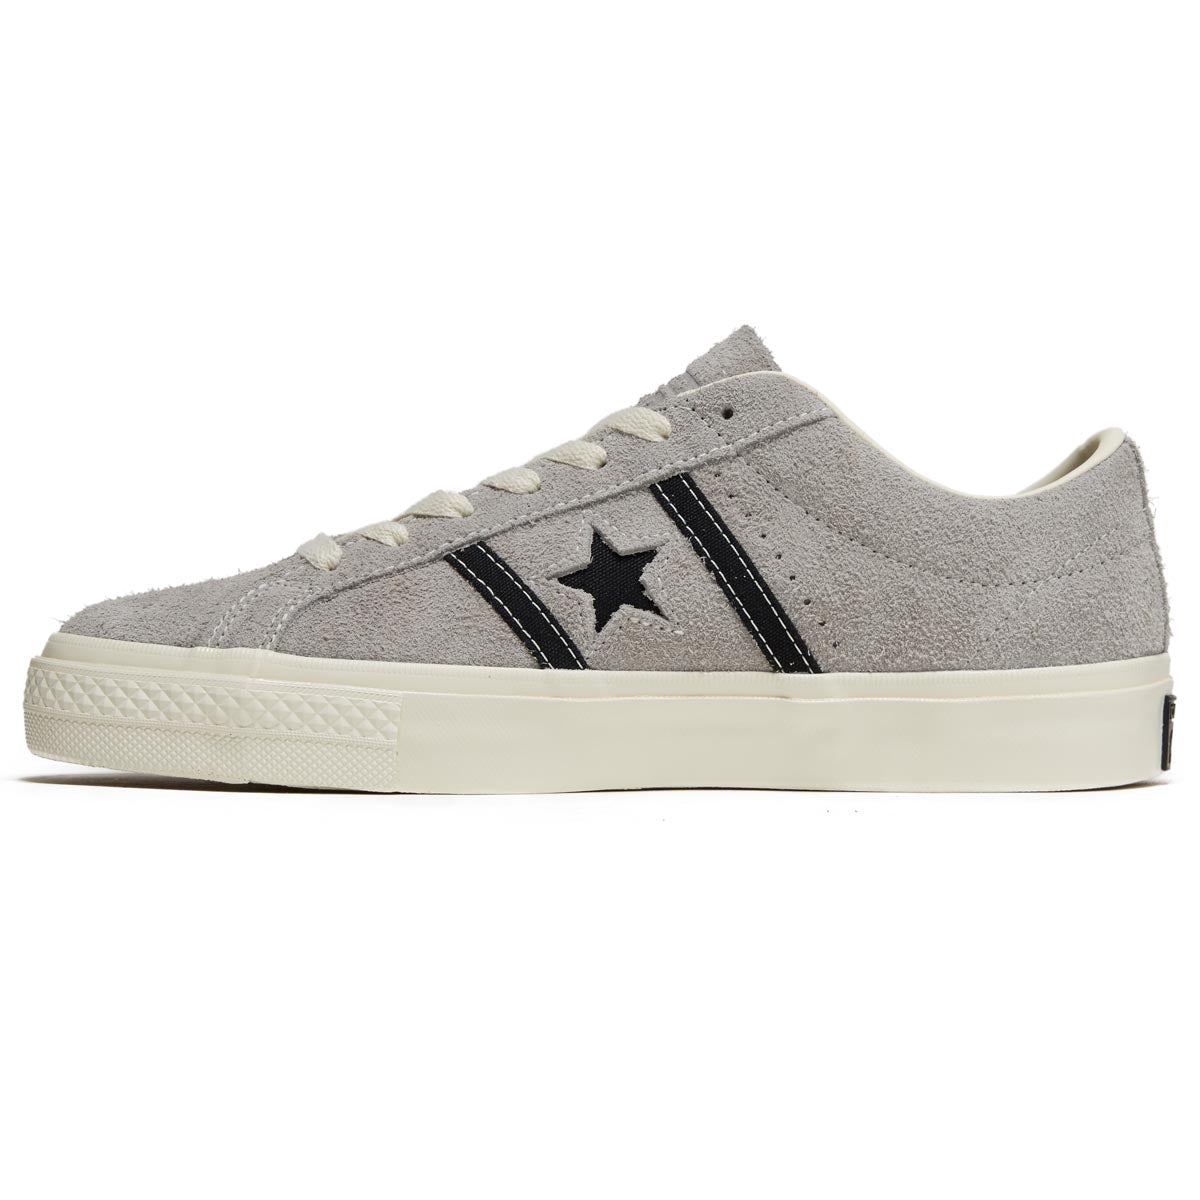 Converse One Star Academy Pro Shoes - Totally Neutral/Black/Egret image 2